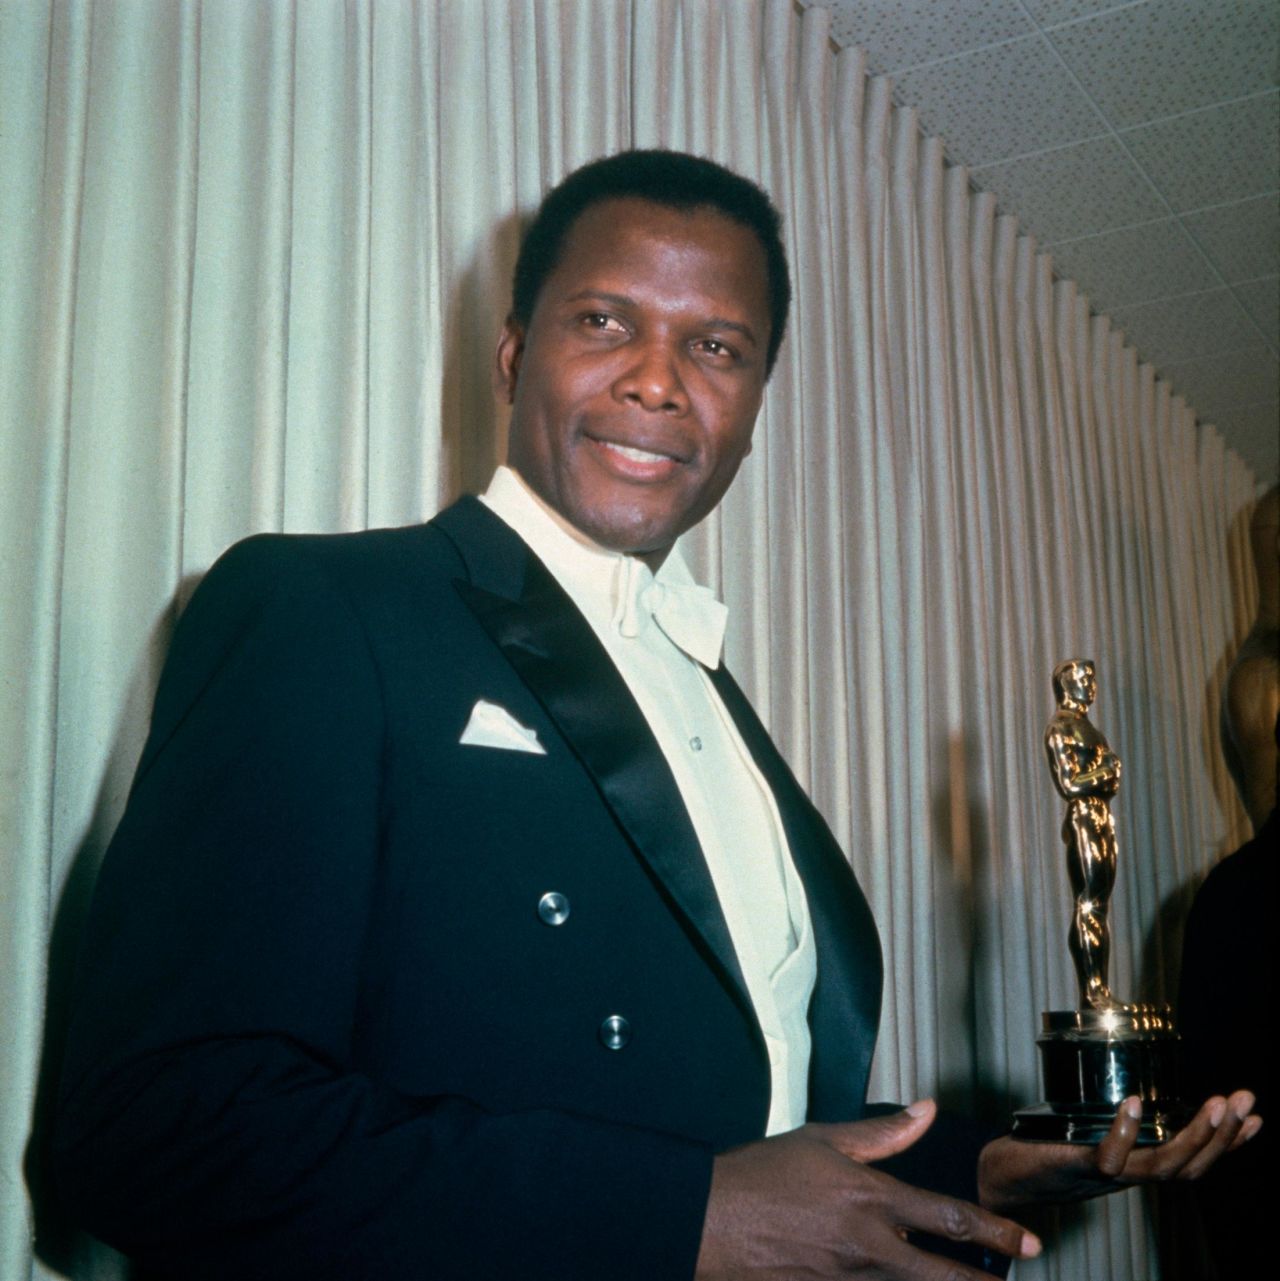 Poitier holds his best actor Oscar after winning for "Lilies of the Field." It was the first time a Black man had won the award for best actor.